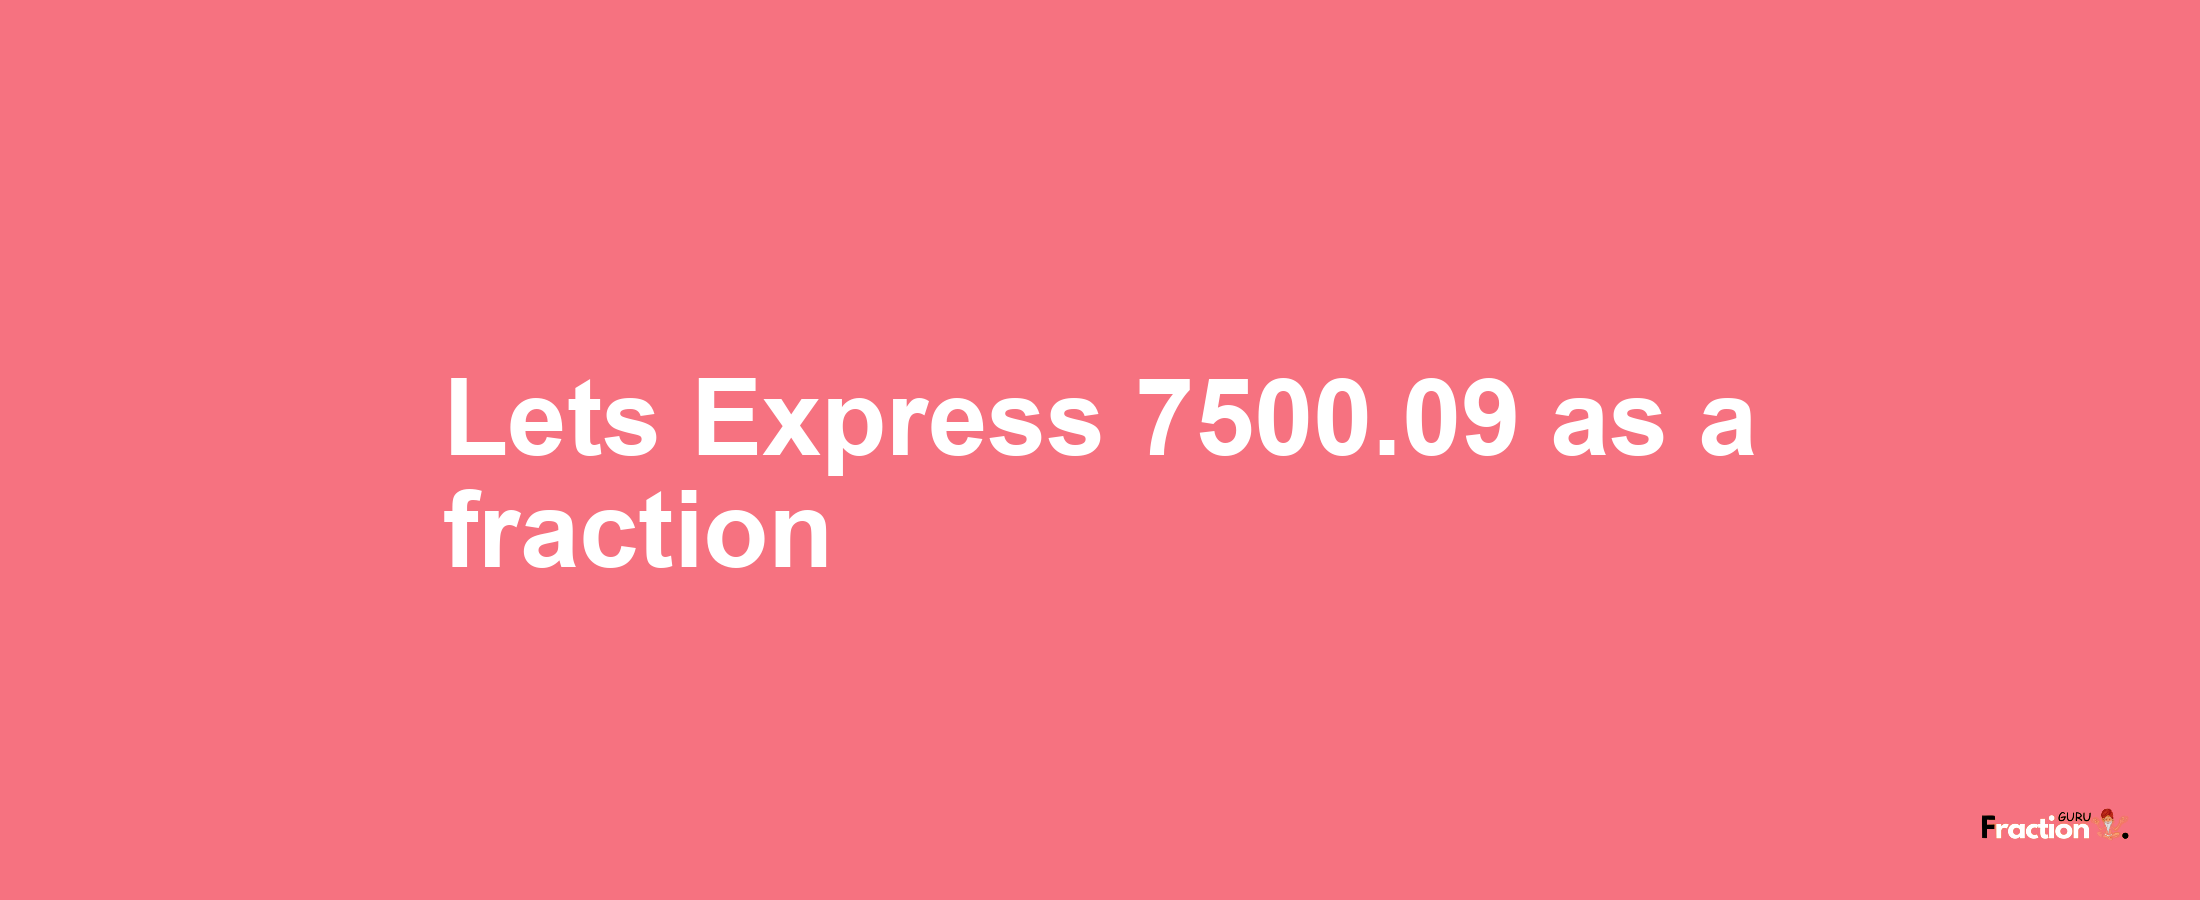 Lets Express 7500.09 as afraction